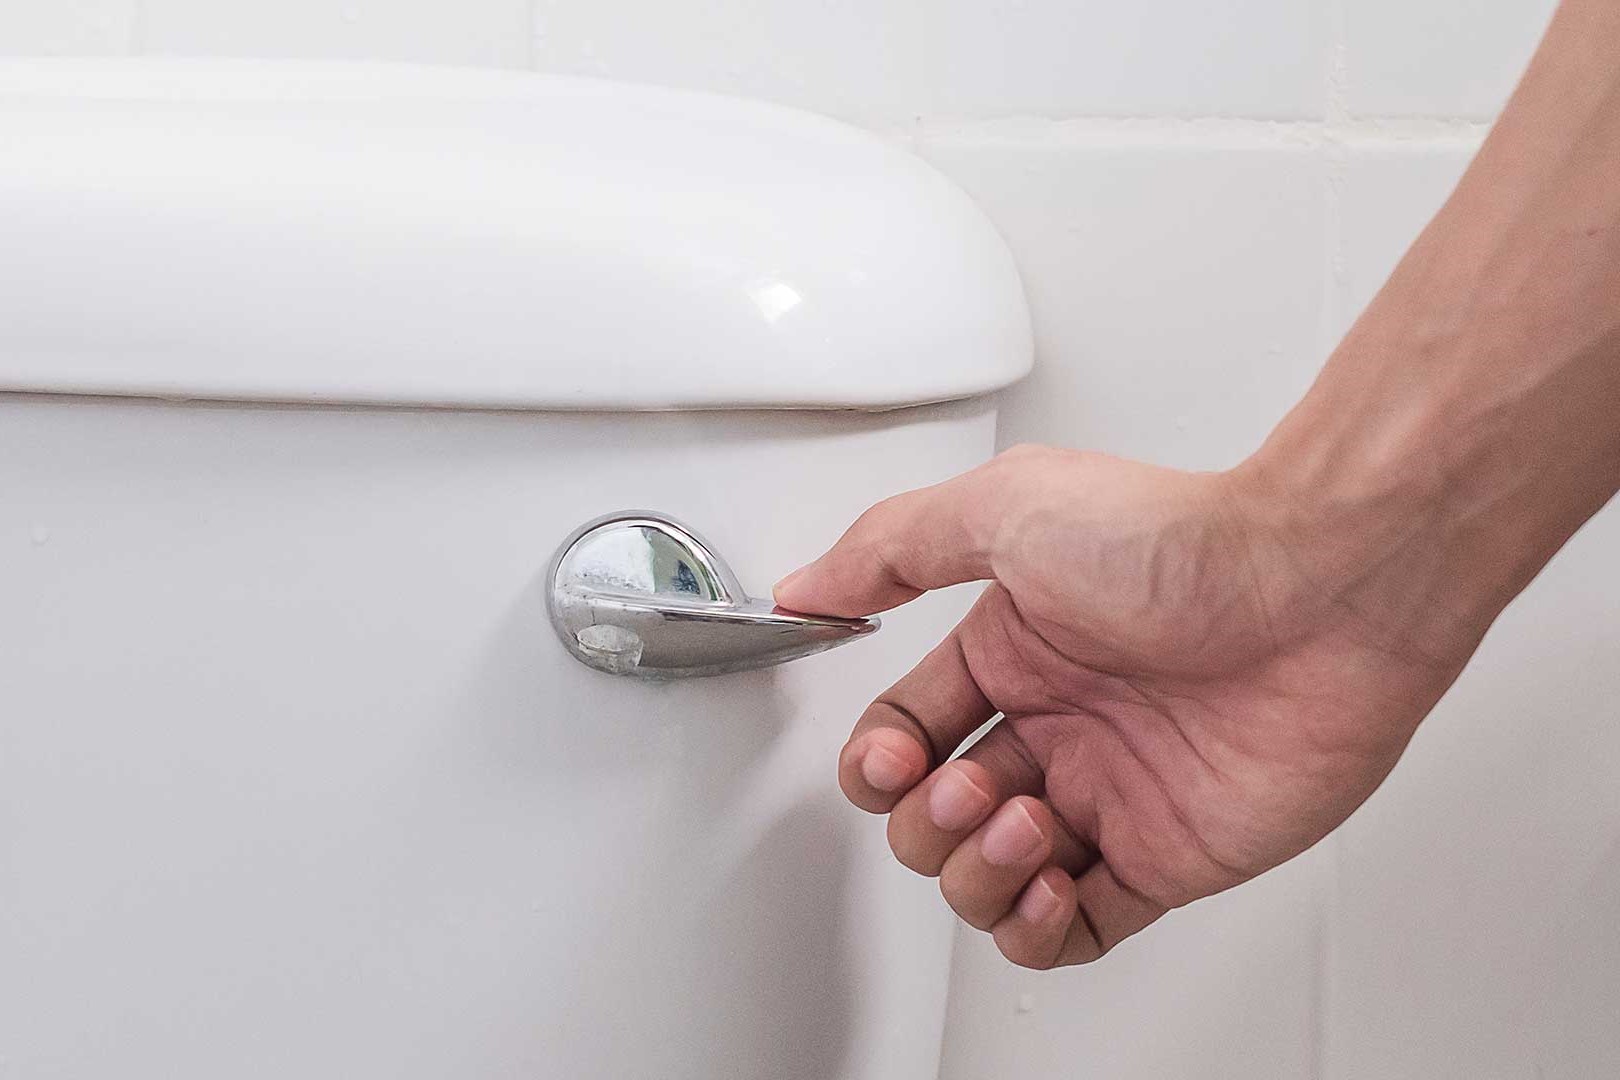 How To Replace A Toilet Handle